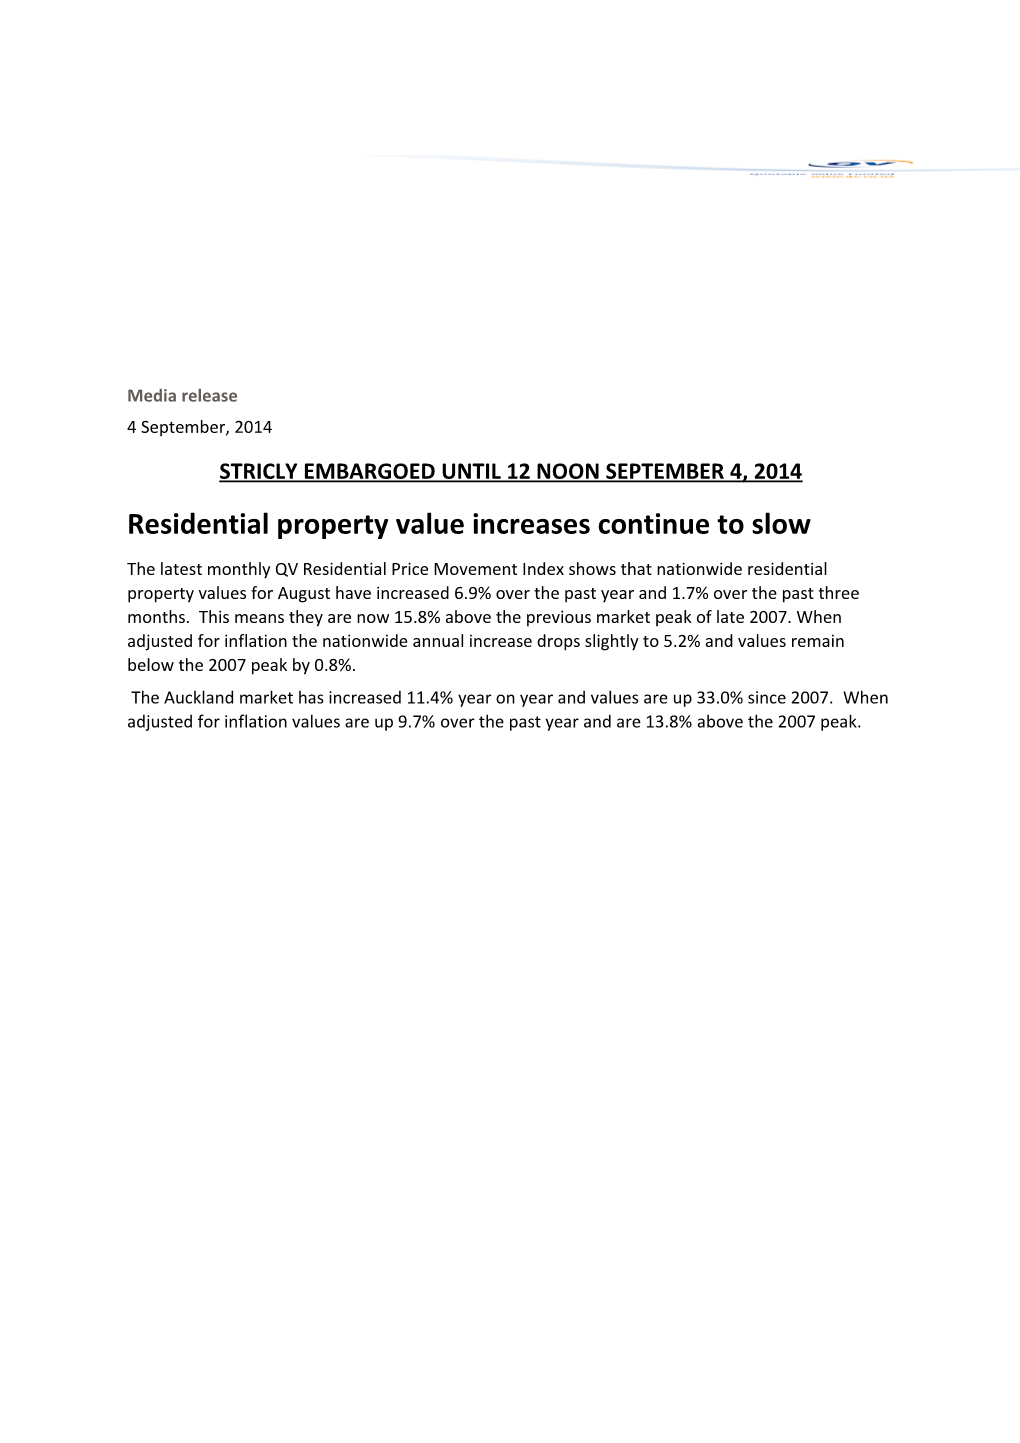 Residential Property Value Increases Continue to Slow